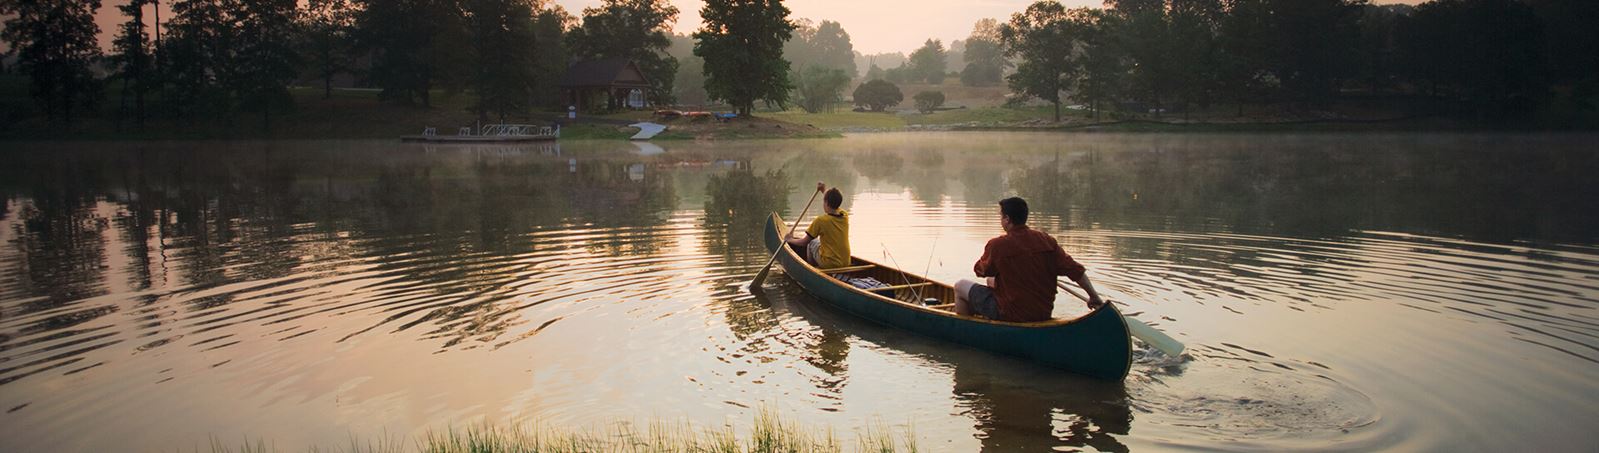 Father and son canoeing at dawn on Lake Sterling